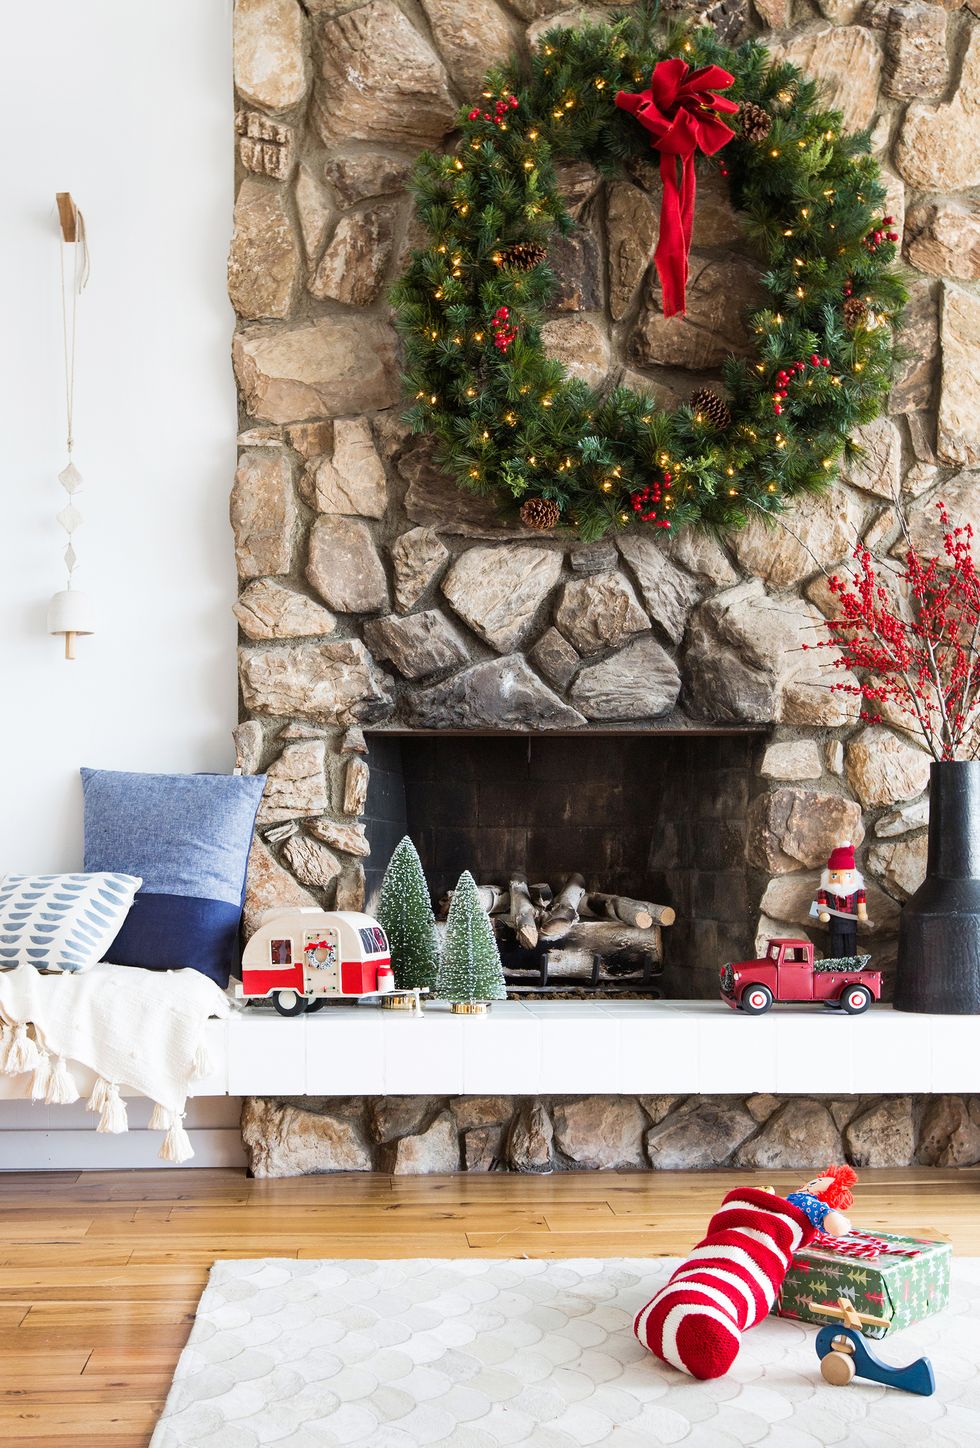 Christmas Homes Decorations Christmas-decorating-ideas-design-by-emily-henderson-design-kid-inspired-christmas-photo-by-tessa-neustadt-2-1597775015